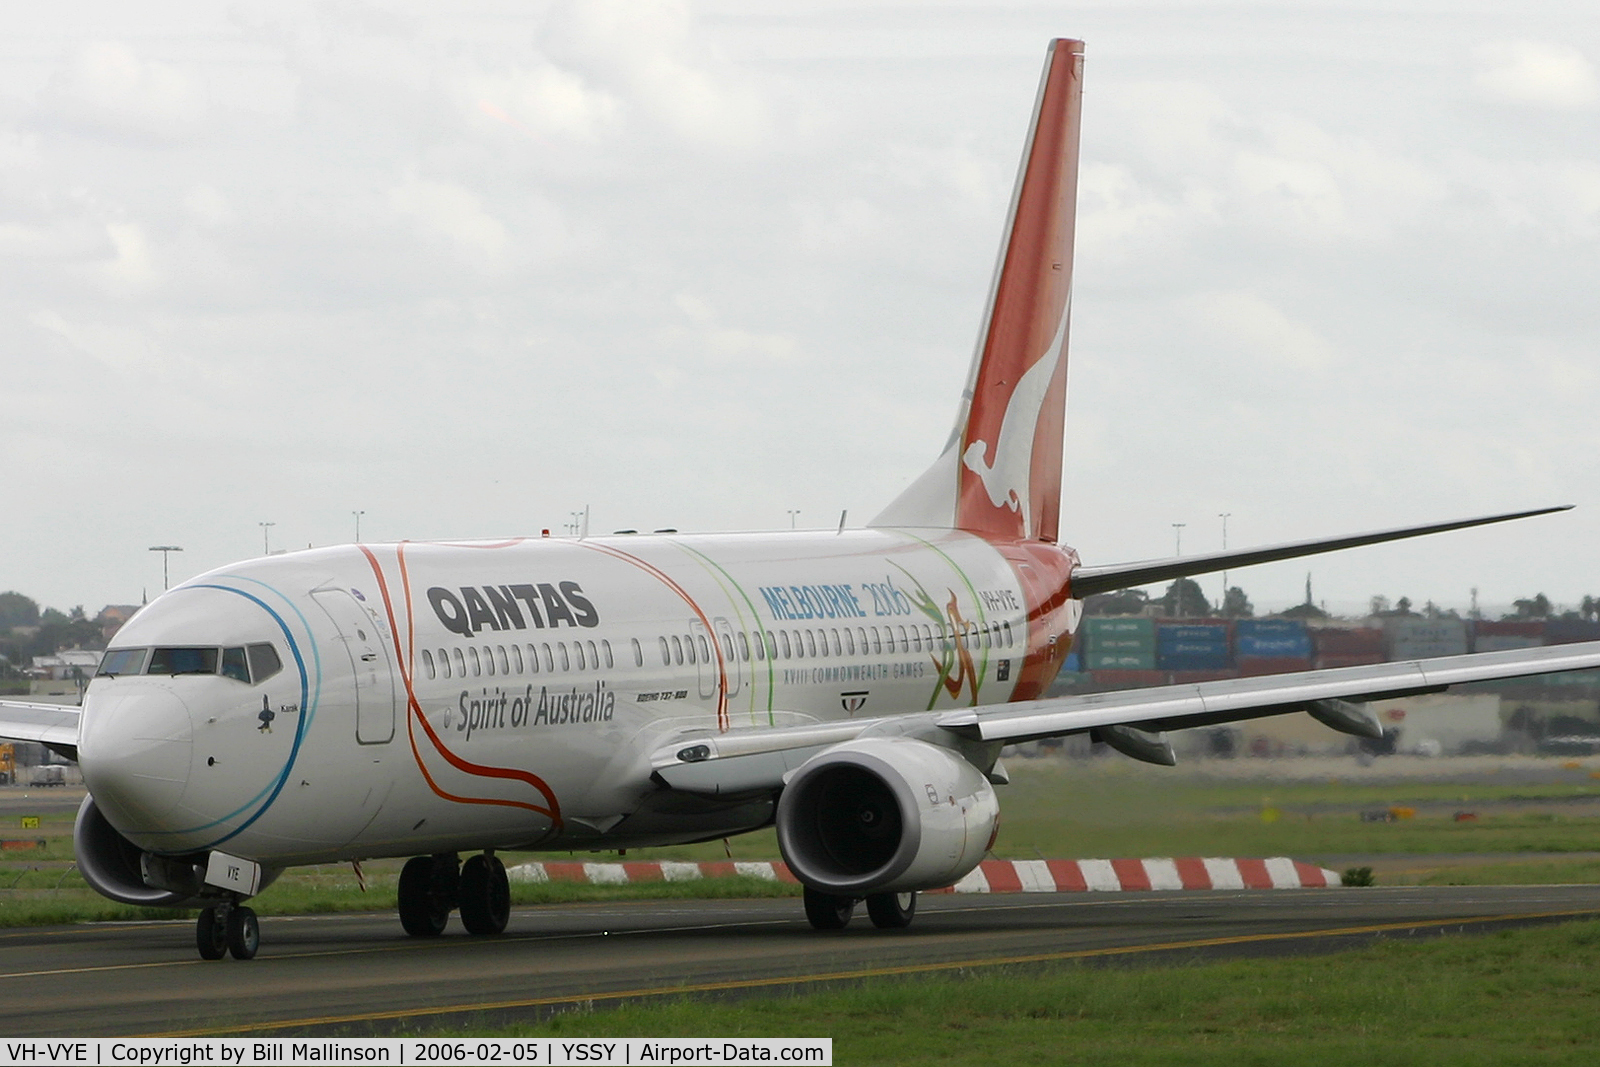 VH-VYE, 2005 Boeing 737-838 C/N 33993, MELBOURNE 2006 Commonwealth Games livery